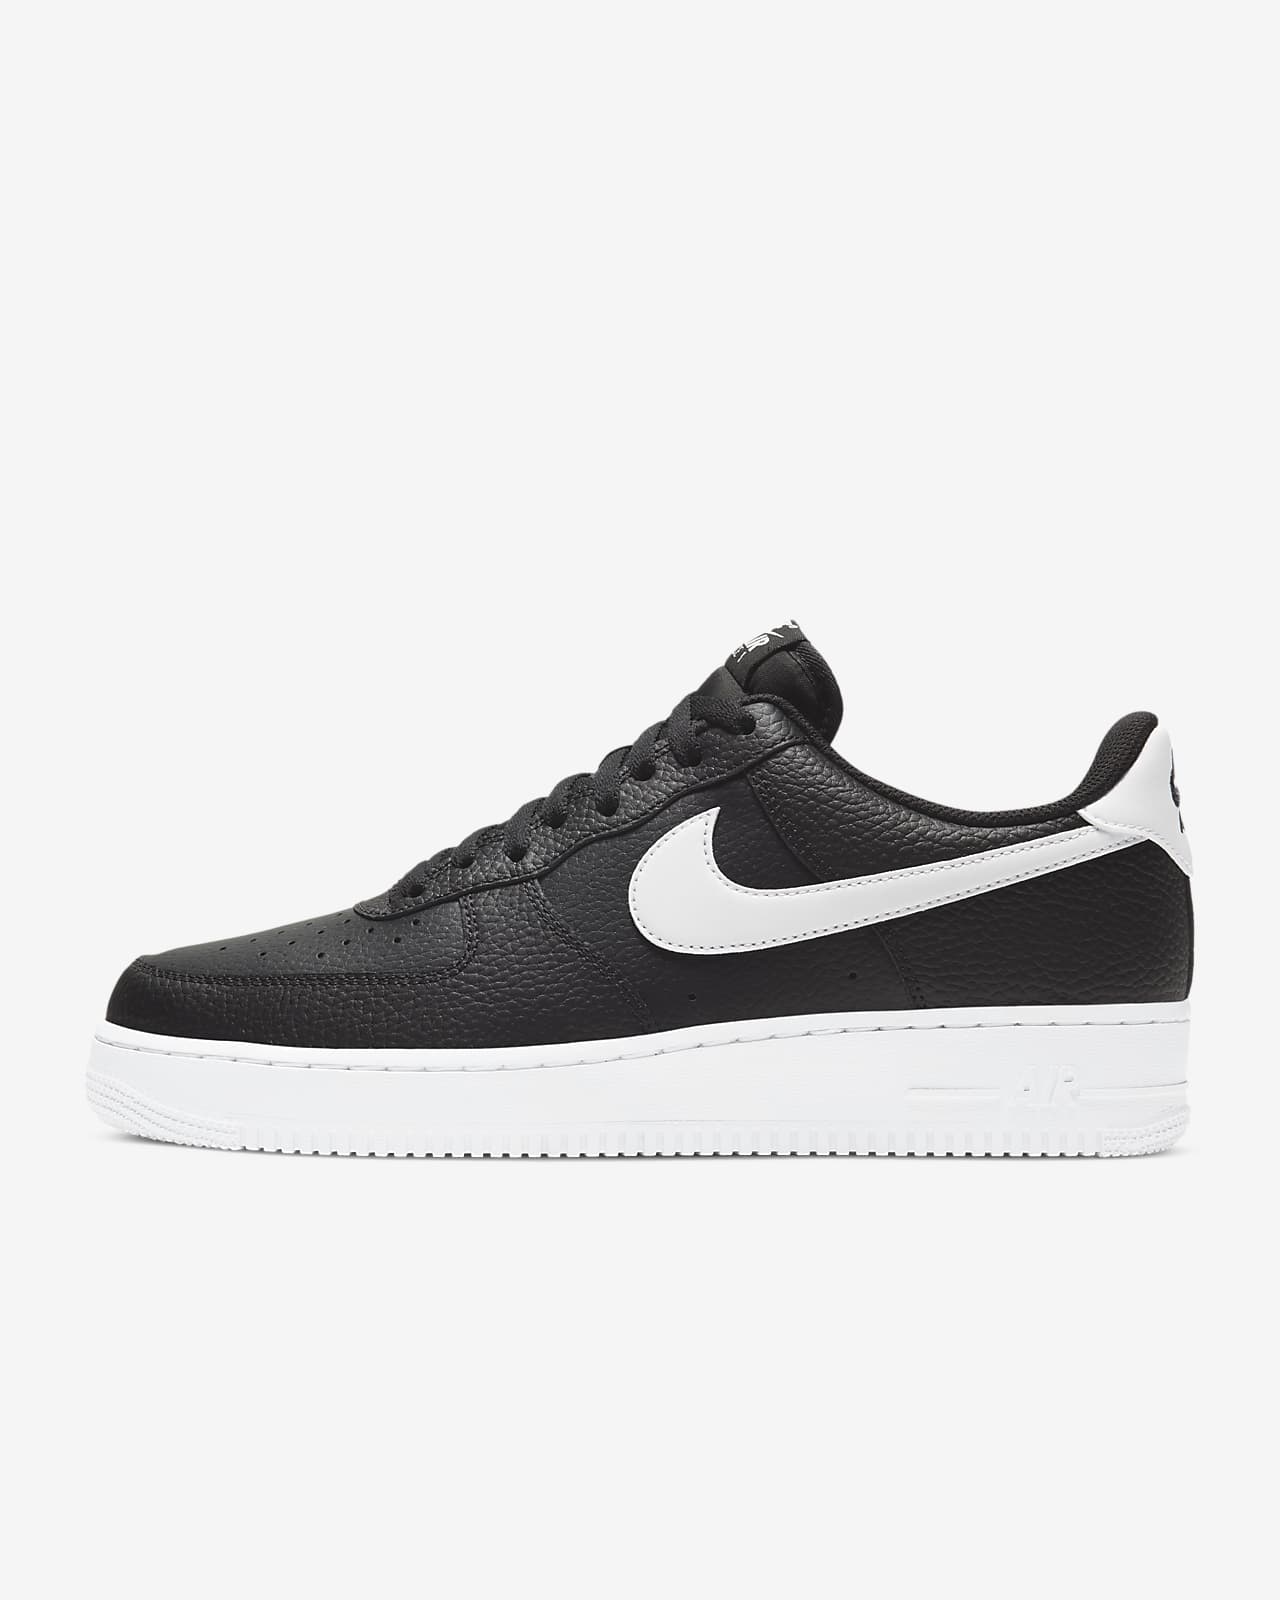 Nike Men's Air Force 1 '07 LV8 Shoes in Black, Size: 9 | Dv2123-001